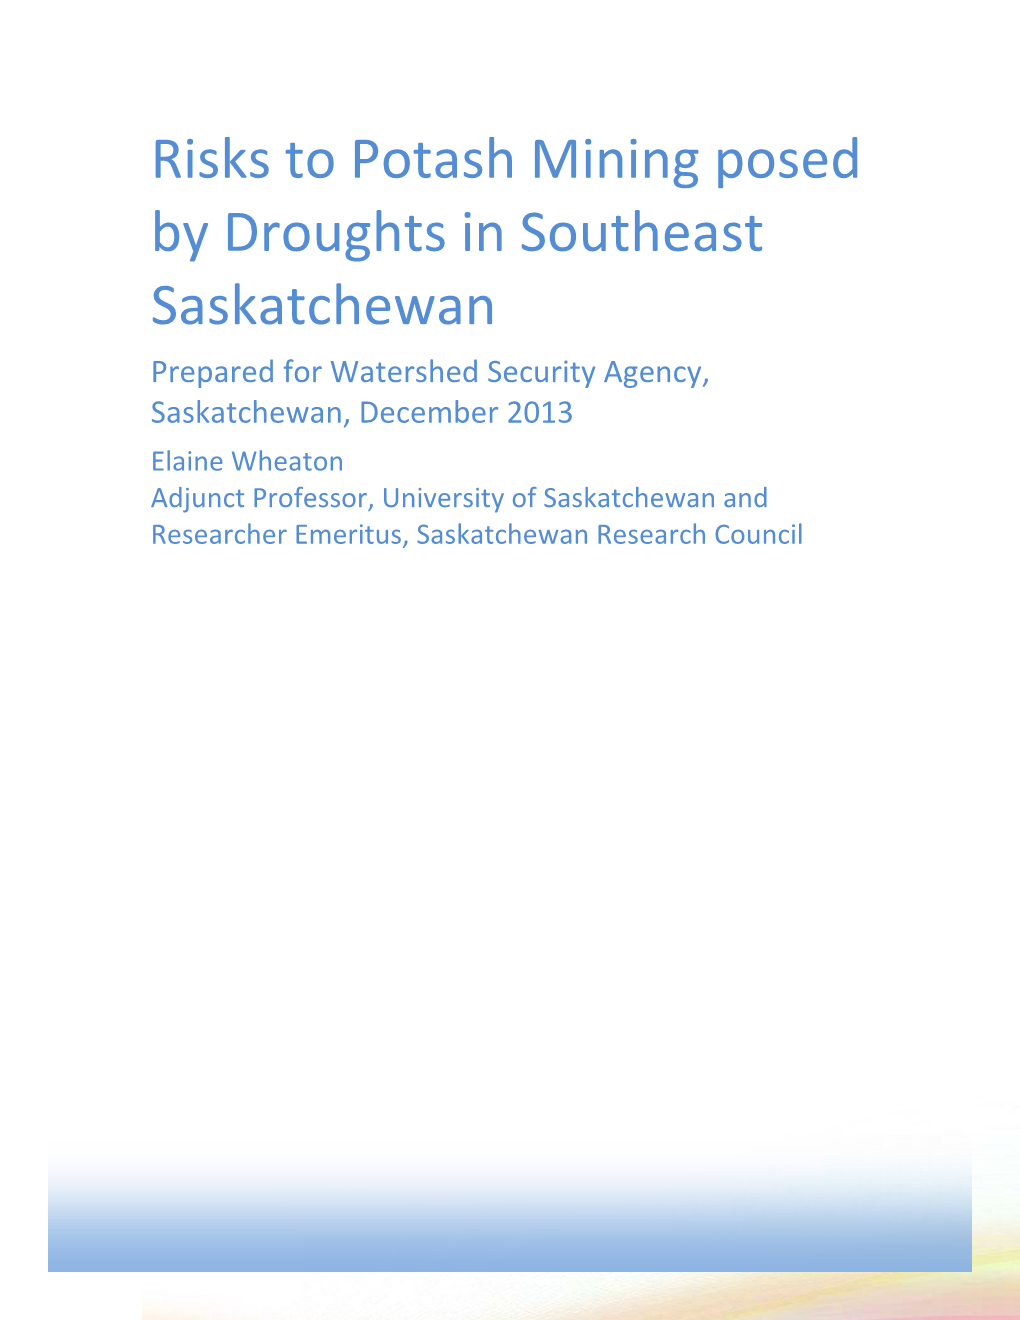 Risks to Potash Mining Posed by Droughts in Southeast Saskatchewan